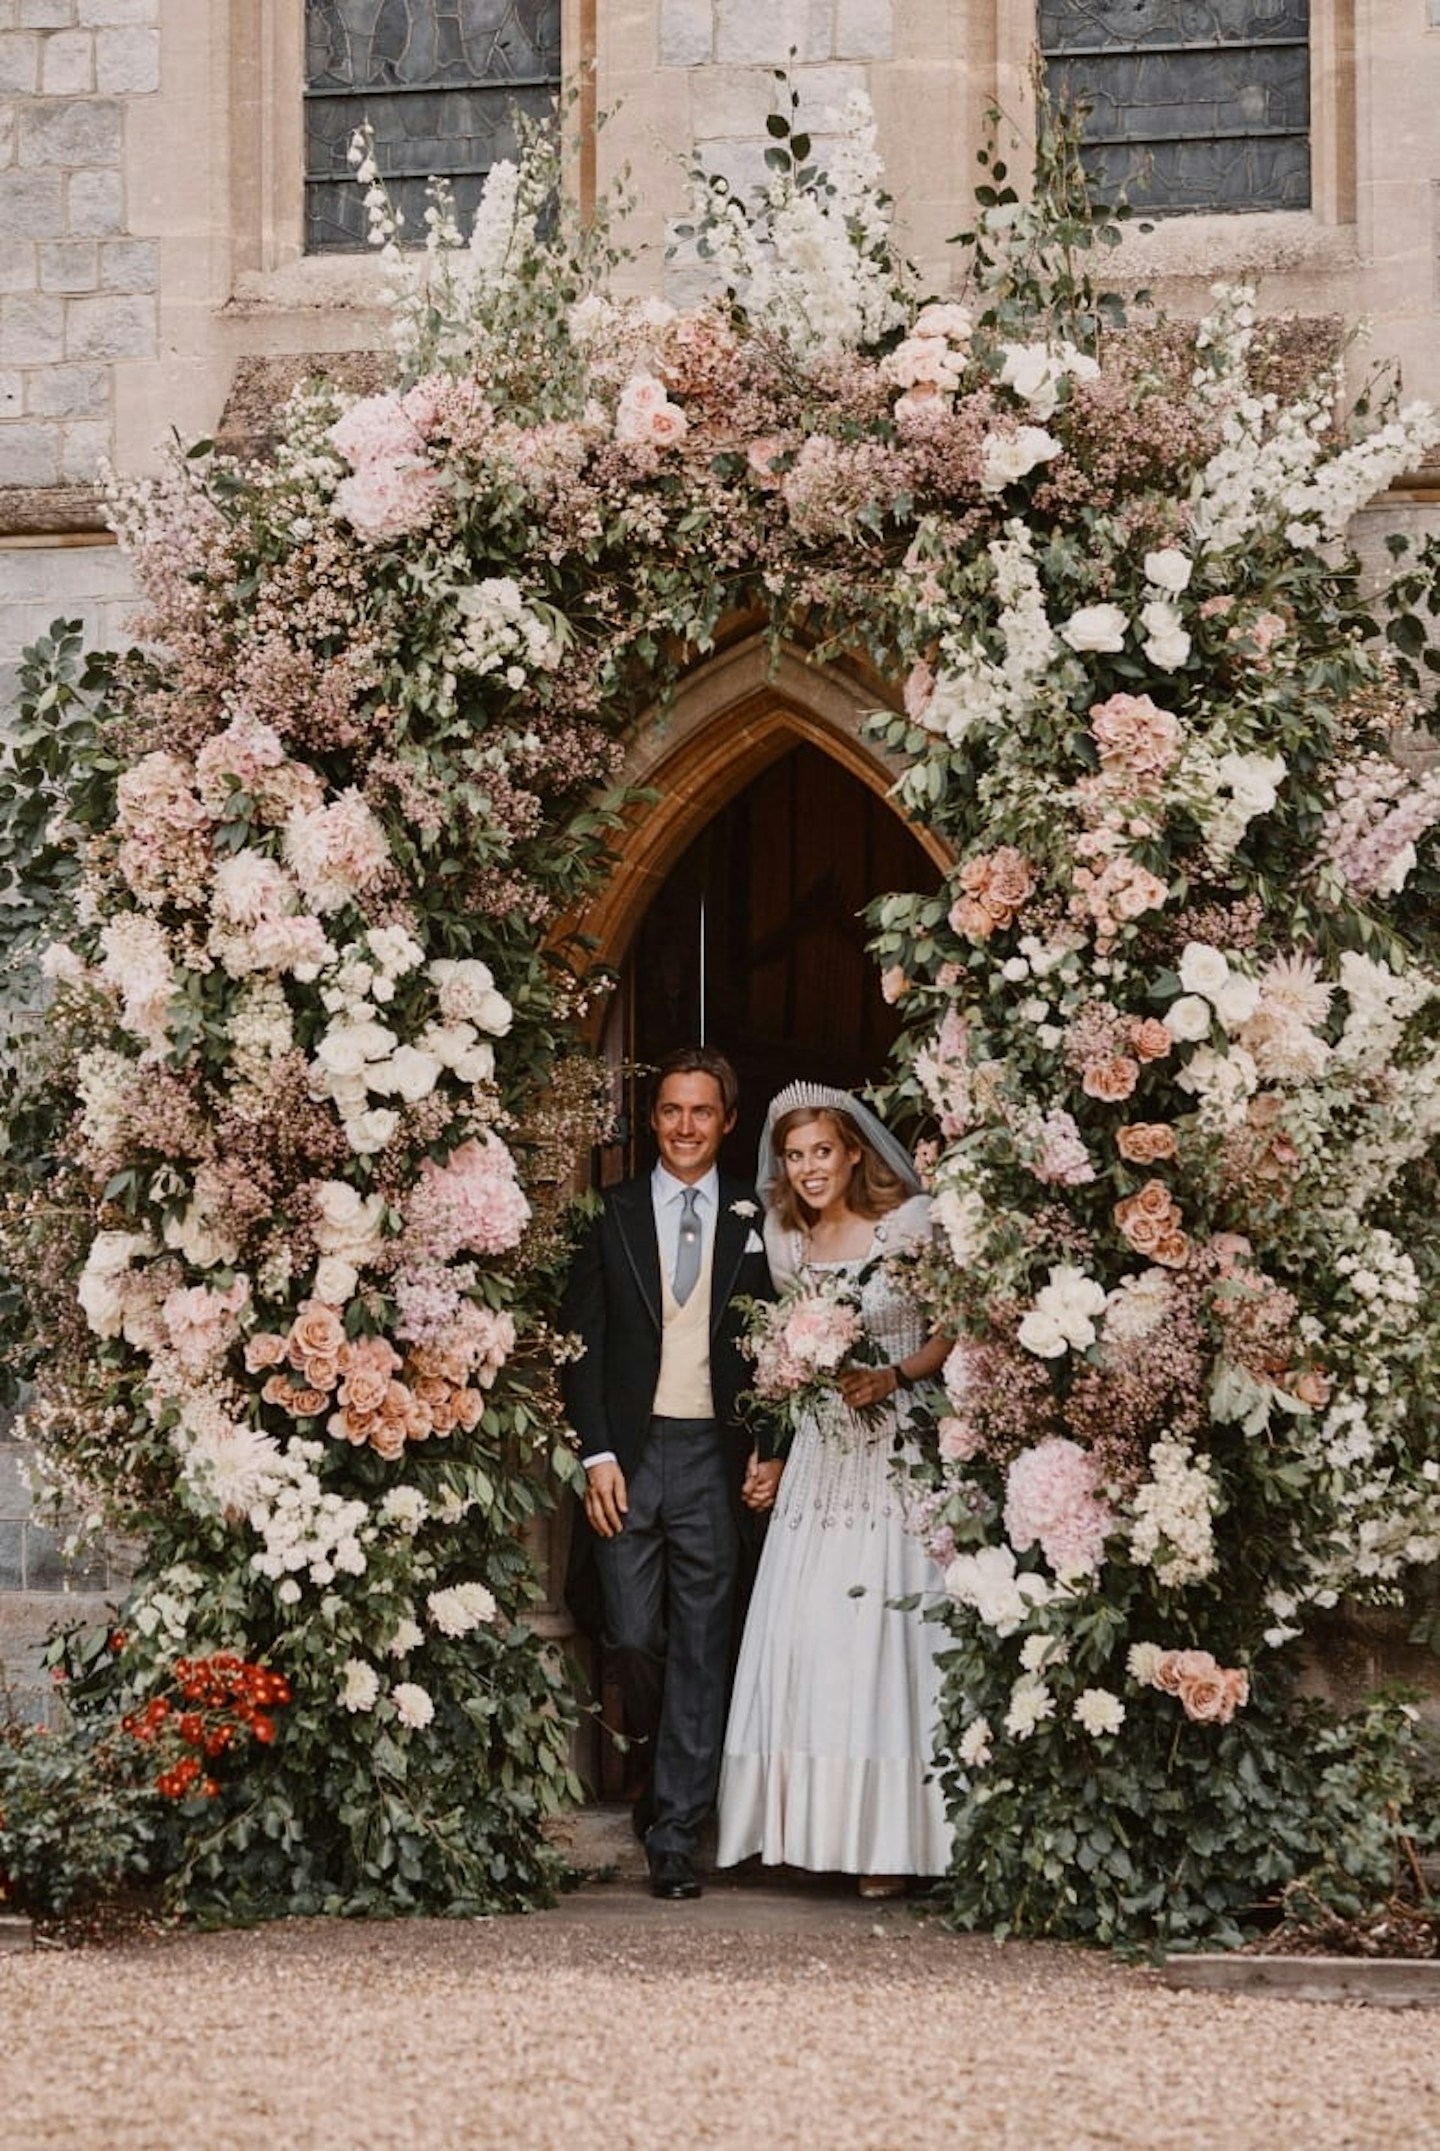 Princess Beatrice married Edoardo Mapello Mozzi in a private ceremony in Windsor. Her vintage Norman Hartnell dress was worn by Queen Elizabeth. The low-key wedding was a surprise, and a departure from the pomp & circumstance of the Royal Family, but still had all the class, heart and beauty we expect.